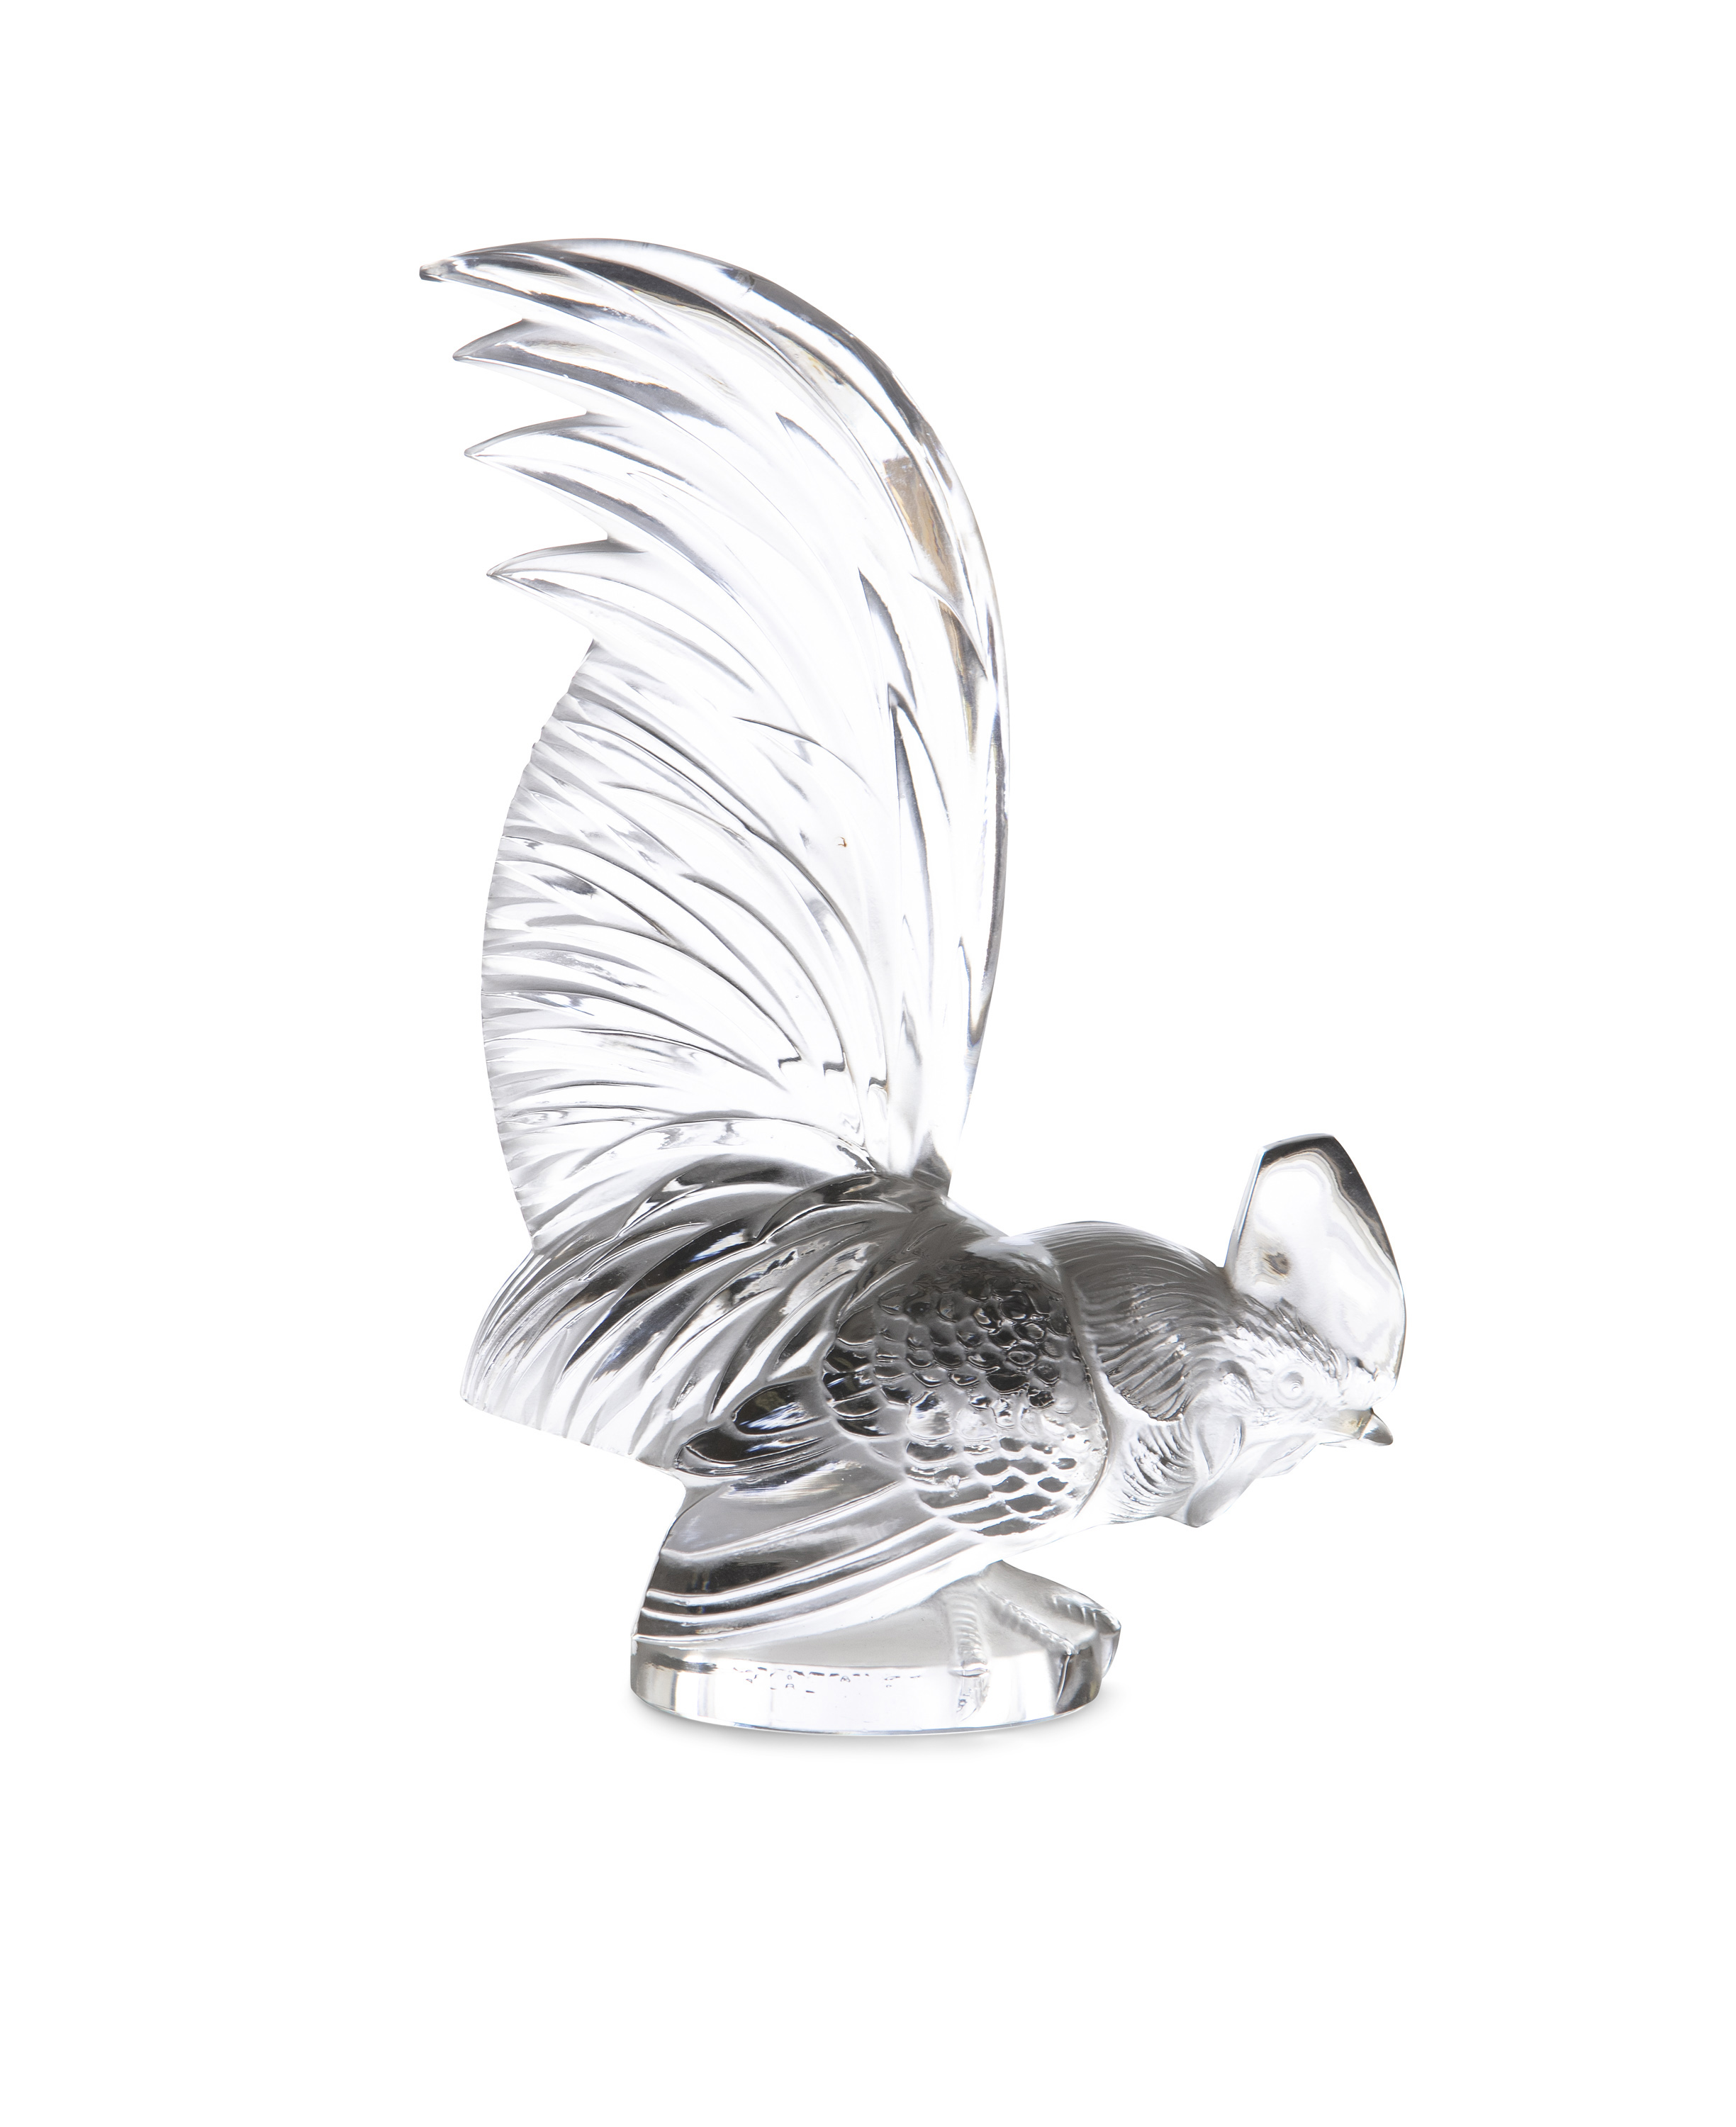 A RARE LALIQUE CAR MASCOT, c.1928, modelled as a cockerel, with fanned tail, standing on a